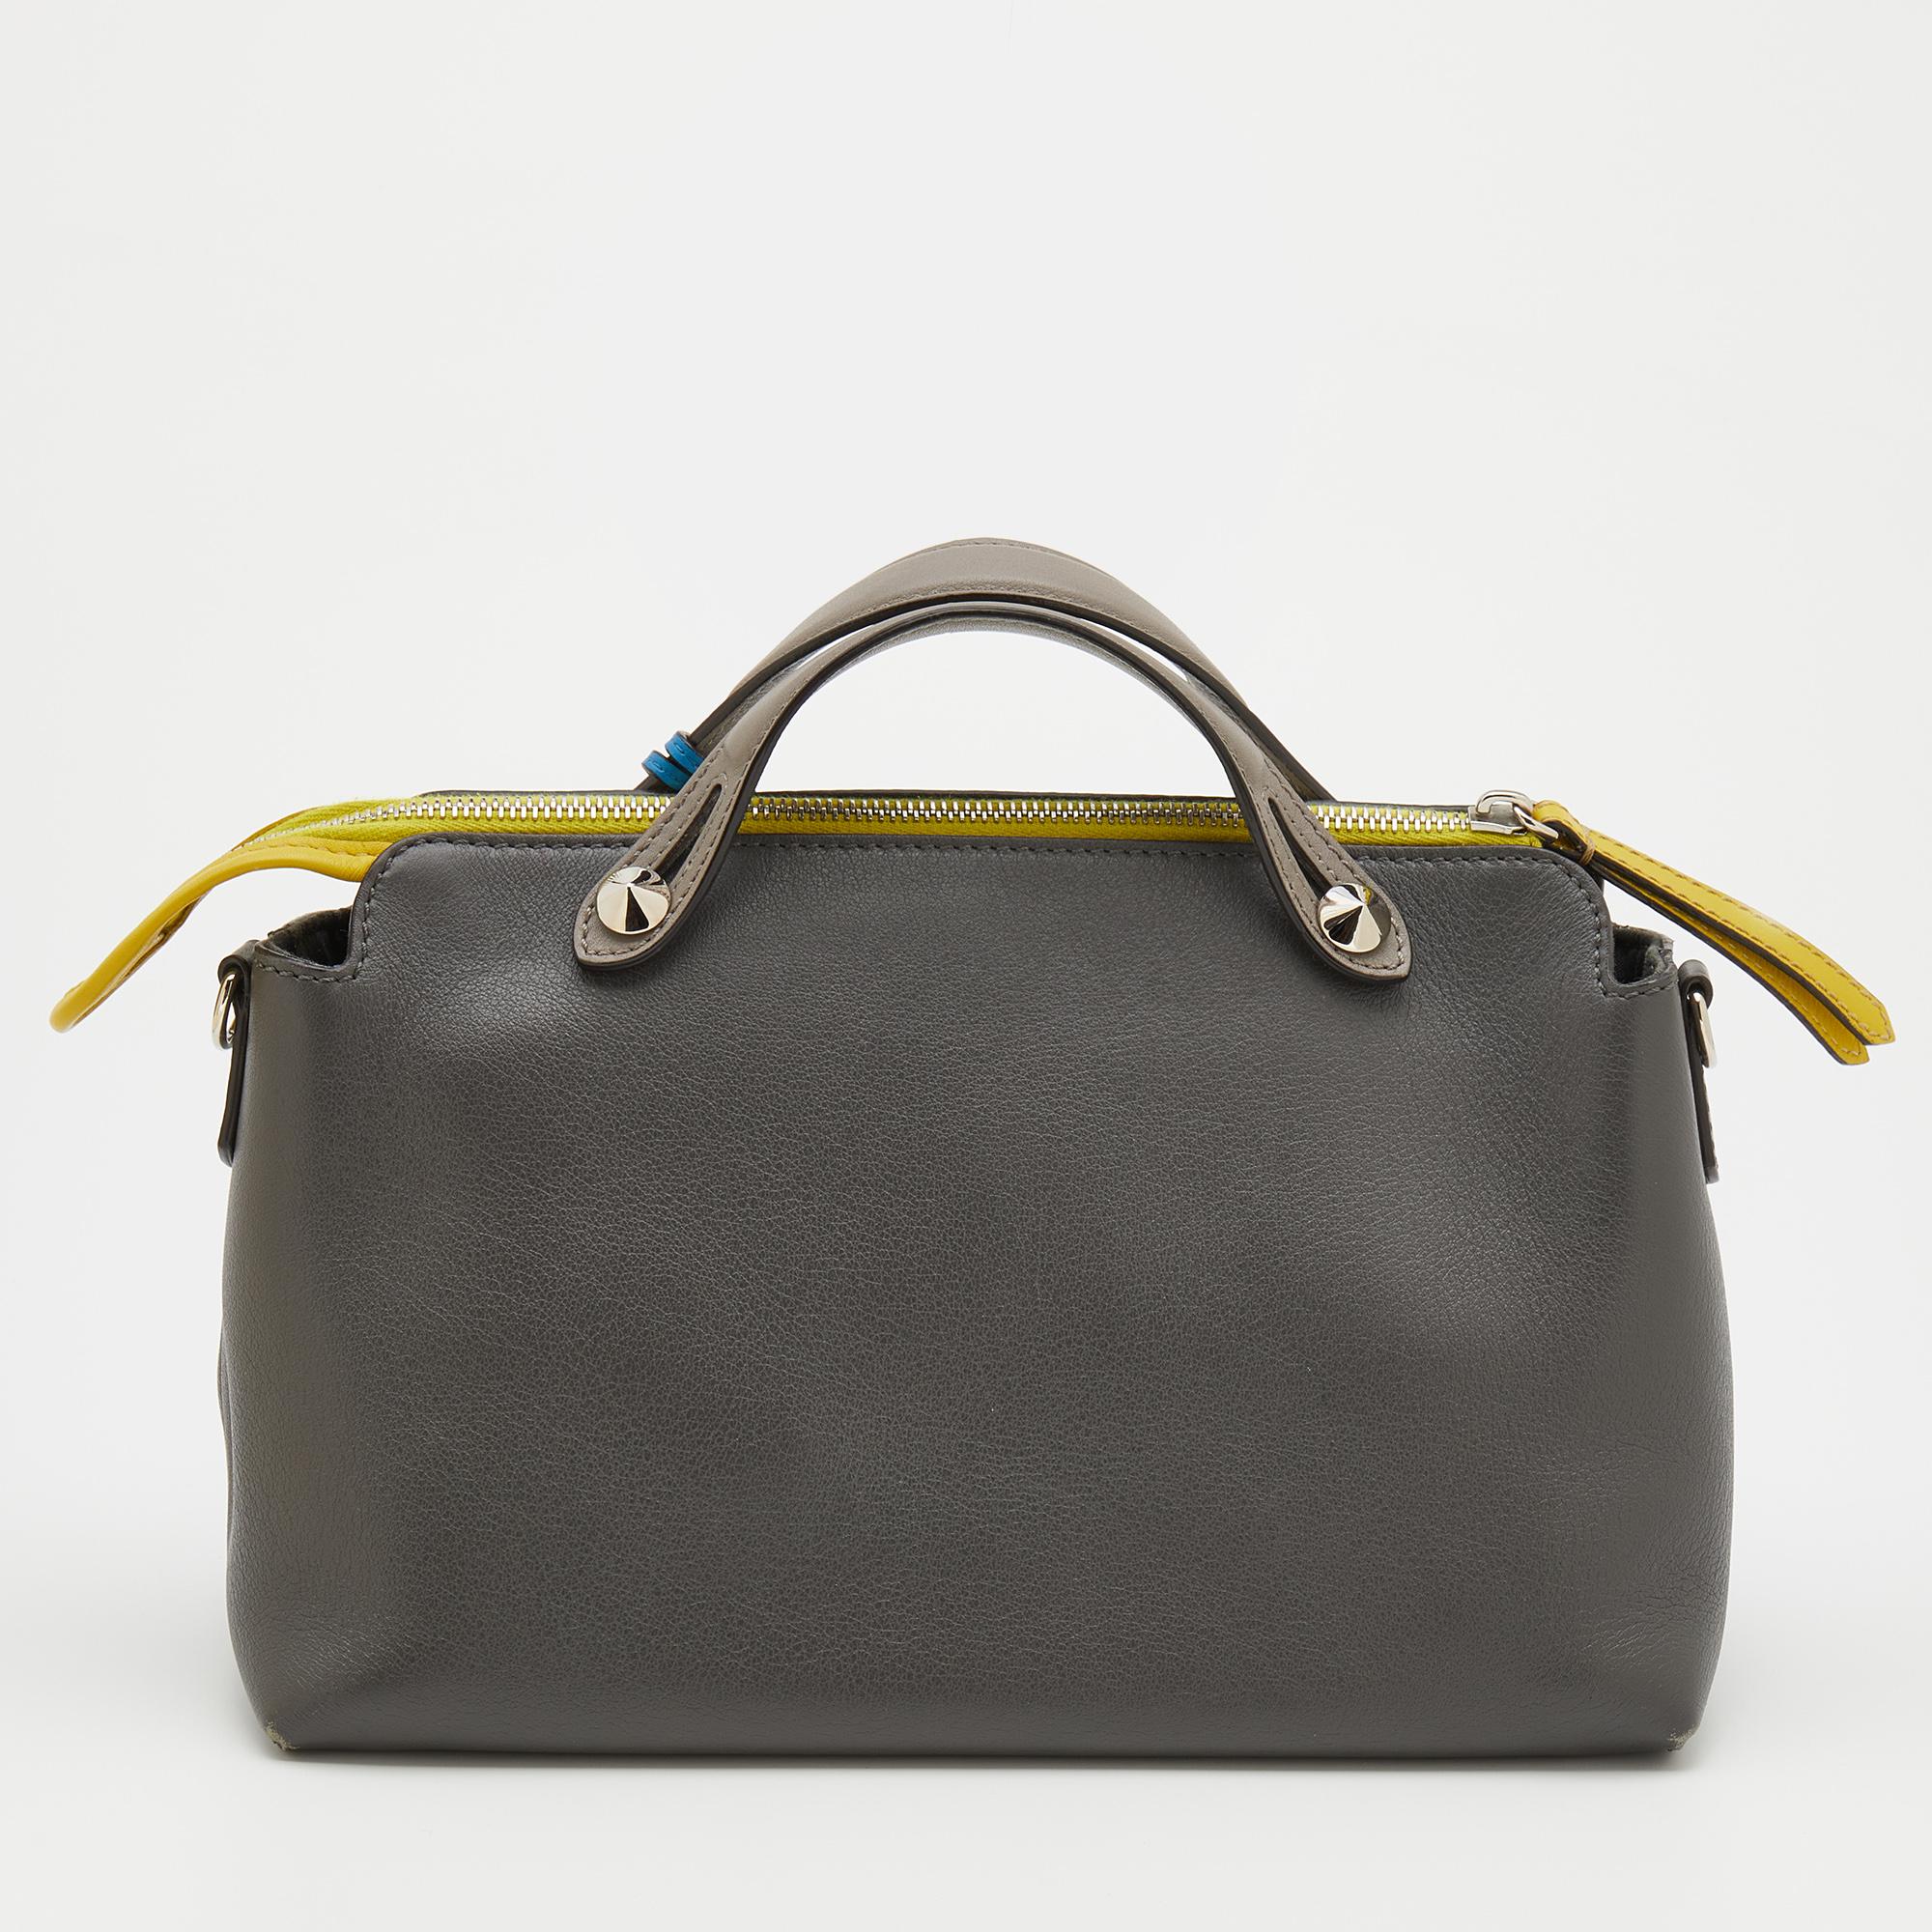 This By The Way bag from Fendi is made from leather. Complemented by silver-tone hardware, it has short handles for a hand-held style. Its main compartment has room for the essentials and is secured by a zip. It is complete with the brand logo